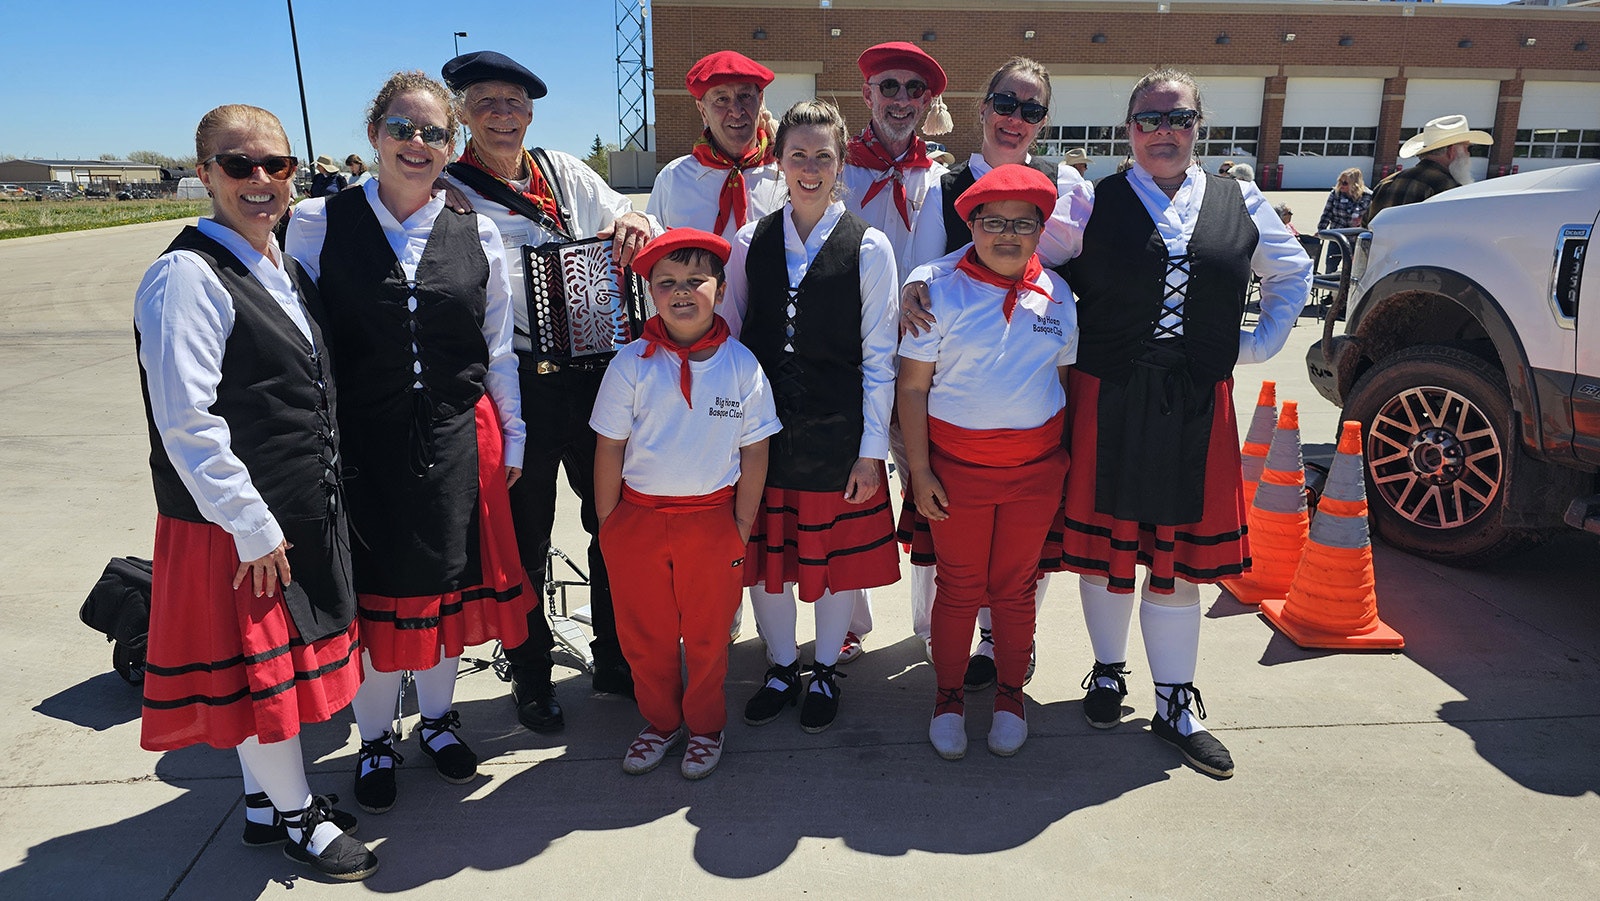 Basque dancers from Buffalo were among those at Gillette's third annual Sheepherding Festival to celebrate their culture and history.